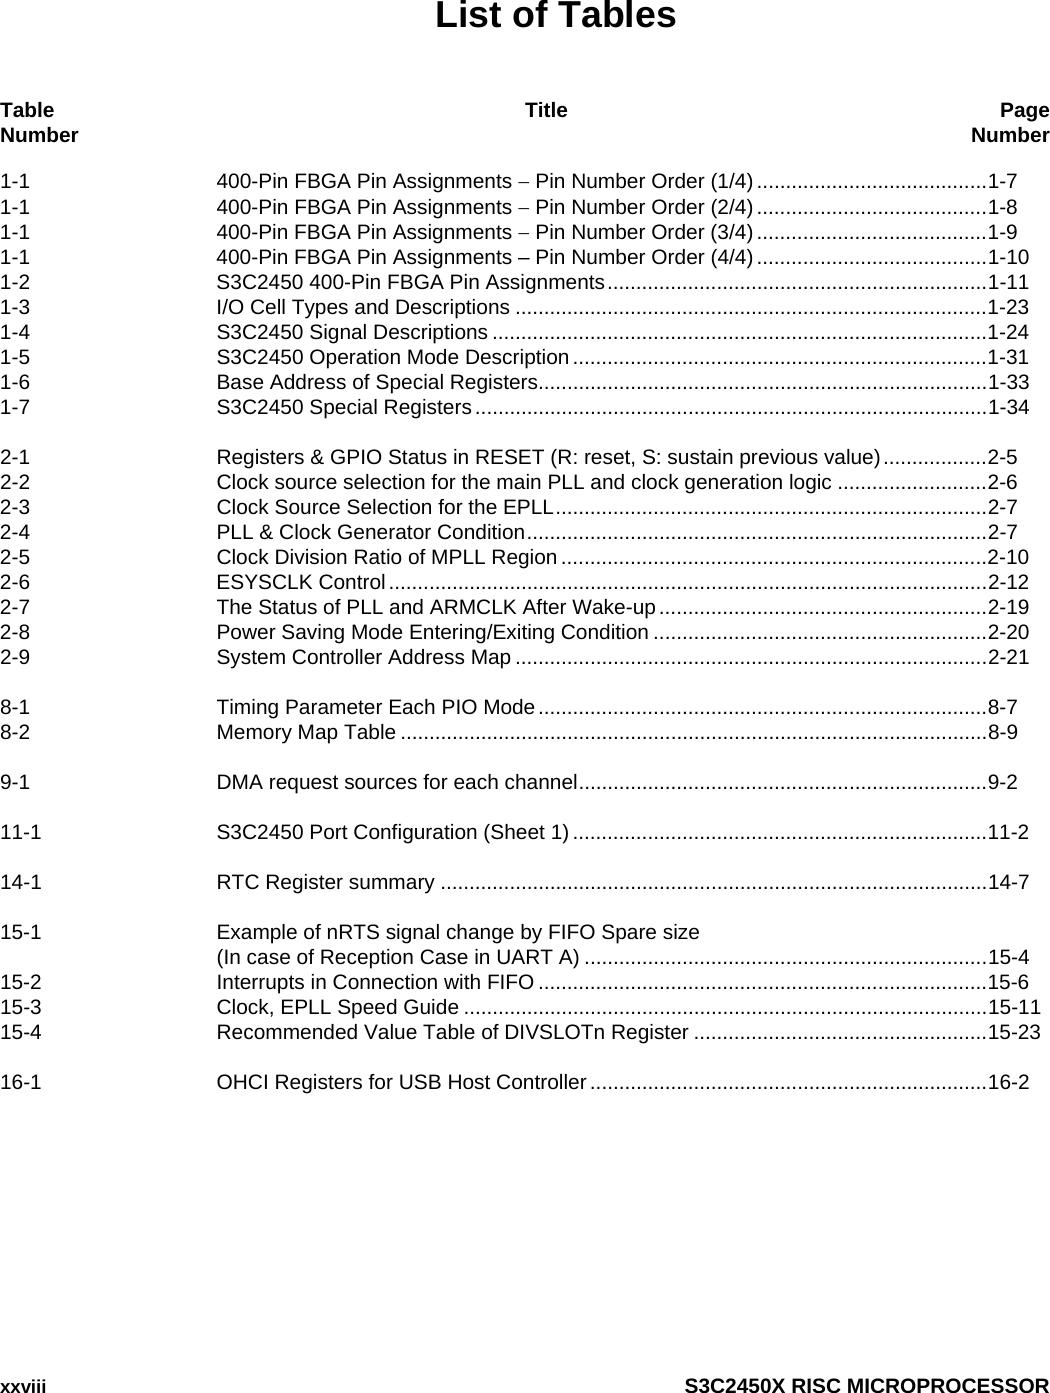  xxviii  S3C2450X RISC MICROPROCESSOR List of Tables Table Title Page Number  Number 1-1   400-Pin FBGA Pin Assignments − Pin Number Order (1/4) ........................................1-7 1-1   400-Pin FBGA Pin Assignments − Pin Number Order (2/4) ........................................1-8 1-1   400-Pin FBGA Pin Assignments − Pin Number Order (3/4) ........................................1-9 1-1   400-Pin FBGA Pin Assignments – Pin Number Order (4/4)........................................1-10 1-2   S3C2450 400-Pin FBGA Pin Assignments..................................................................1-11 1-3   I/O Cell Types and Descriptions ..................................................................................1-23 1-4   S3C2450 Signal Descriptions ......................................................................................1-24 1-5   S3C2450 Operation Mode Description ........................................................................1-31 1-6   Base Address of Special Registers..............................................................................1-33 1-7   S3C2450 Special Registers.........................................................................................1-34  2-1   Registers &amp; GPIO Status in RESET (R: reset, S: sustain previous value)..................2-5 2-2   Clock source selection for the main PLL and clock generation logic ..........................2-6 2-3   Clock Source Selection for the EPLL...........................................................................2-7 2-4   PLL &amp; Clock Generator Condition................................................................................2-7 2-5   Clock Division Ratio of MPLL Region ..........................................................................2-10 2-6   ESYSCLK Control........................................................................................................2-12 2-7   The Status of PLL and ARMCLK After Wake-up.........................................................2-19 2-8   Power Saving Mode Entering/Exiting Condition ..........................................................2-20 2-9   System Controller Address Map ..................................................................................2-21  8-1   Timing Parameter Each PIO Mode..............................................................................8-7 8-2   Memory Map Table ......................................................................................................8-9  9-1   DMA request sources for each channel.......................................................................9-2  11-1   S3C2450 Port Configuration (Sheet 1) ........................................................................11-2  14-1   RTC Register summary ...............................................................................................14-7  15-1   Example of nRTS signal change by FIFO Spare size   (In case of Reception Case in UART A) ......................................................................15-4 15-2   Interrupts in Connection with FIFO ..............................................................................15-6 15-3   Clock, EPLL Speed Guide ...........................................................................................15-11 15-4   Recommended Value Table of DIVSLOTn Register ...................................................15-23  16-1   OHCI Registers for USB Host Controller .....................................................................16-2     